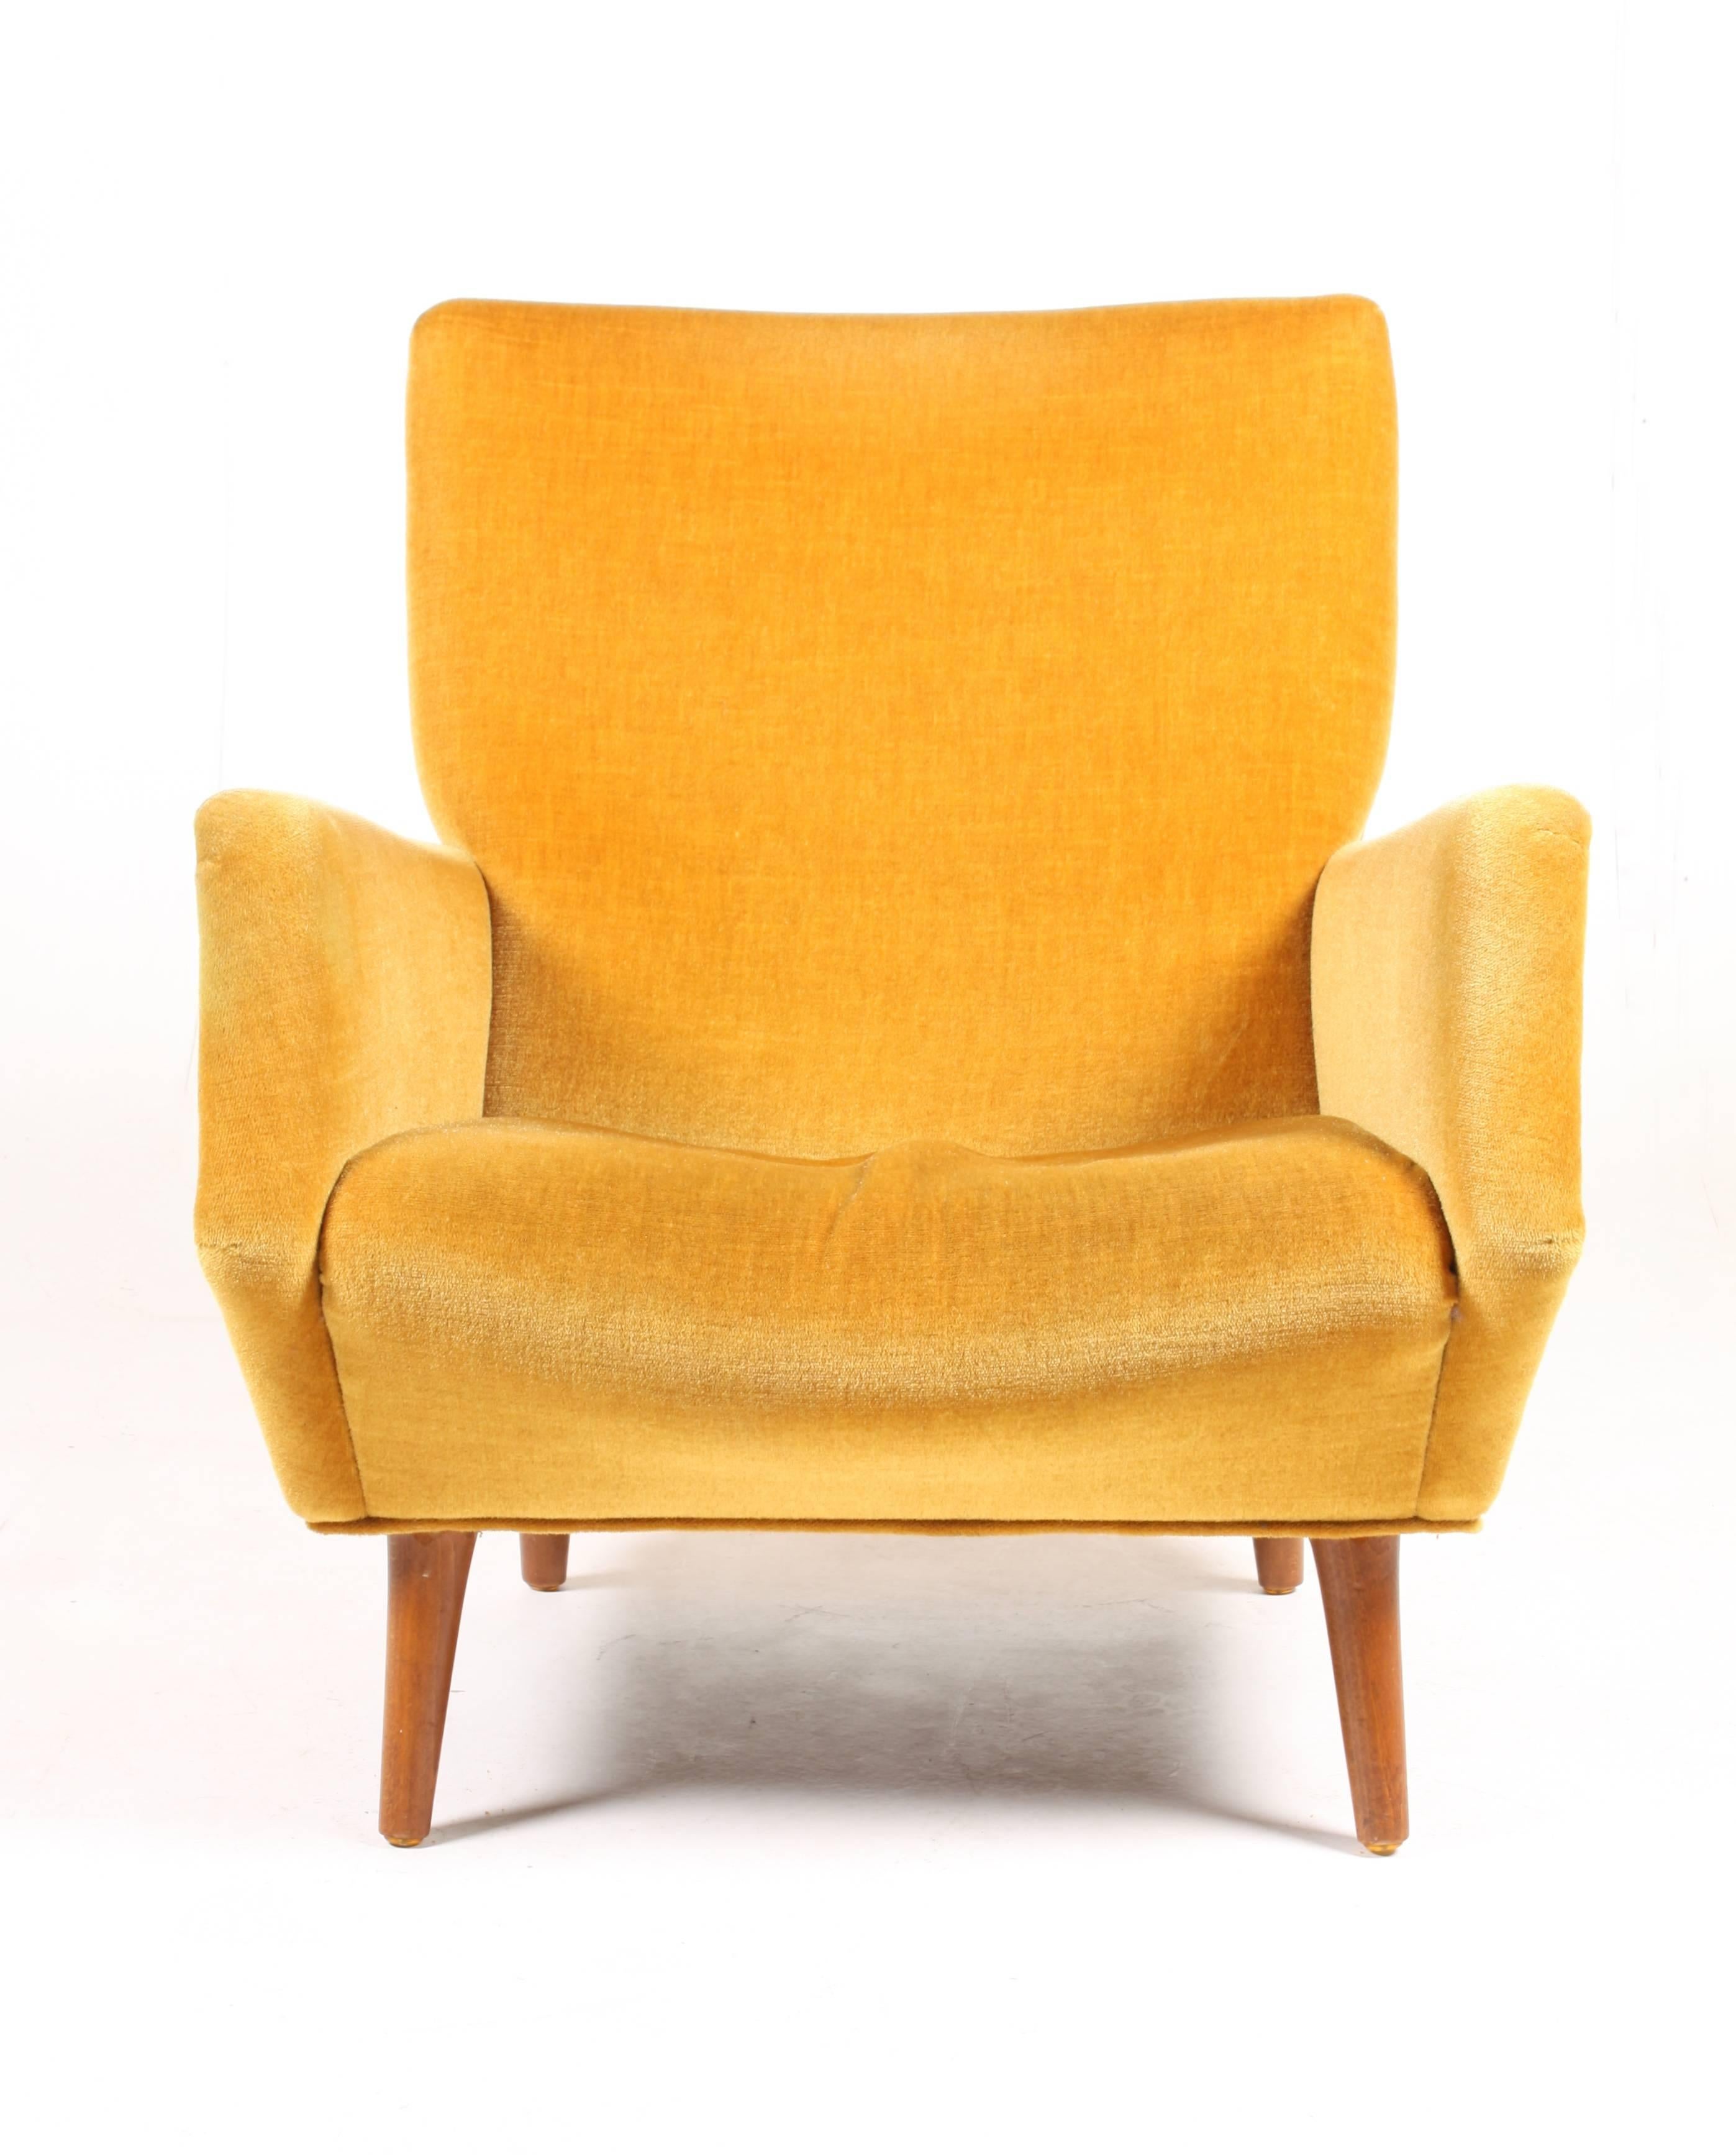 Pair of very comfortable lounge chairs in yellow velvet. Designed by Gio Ponti Cassina, Italy. Pristine condition.